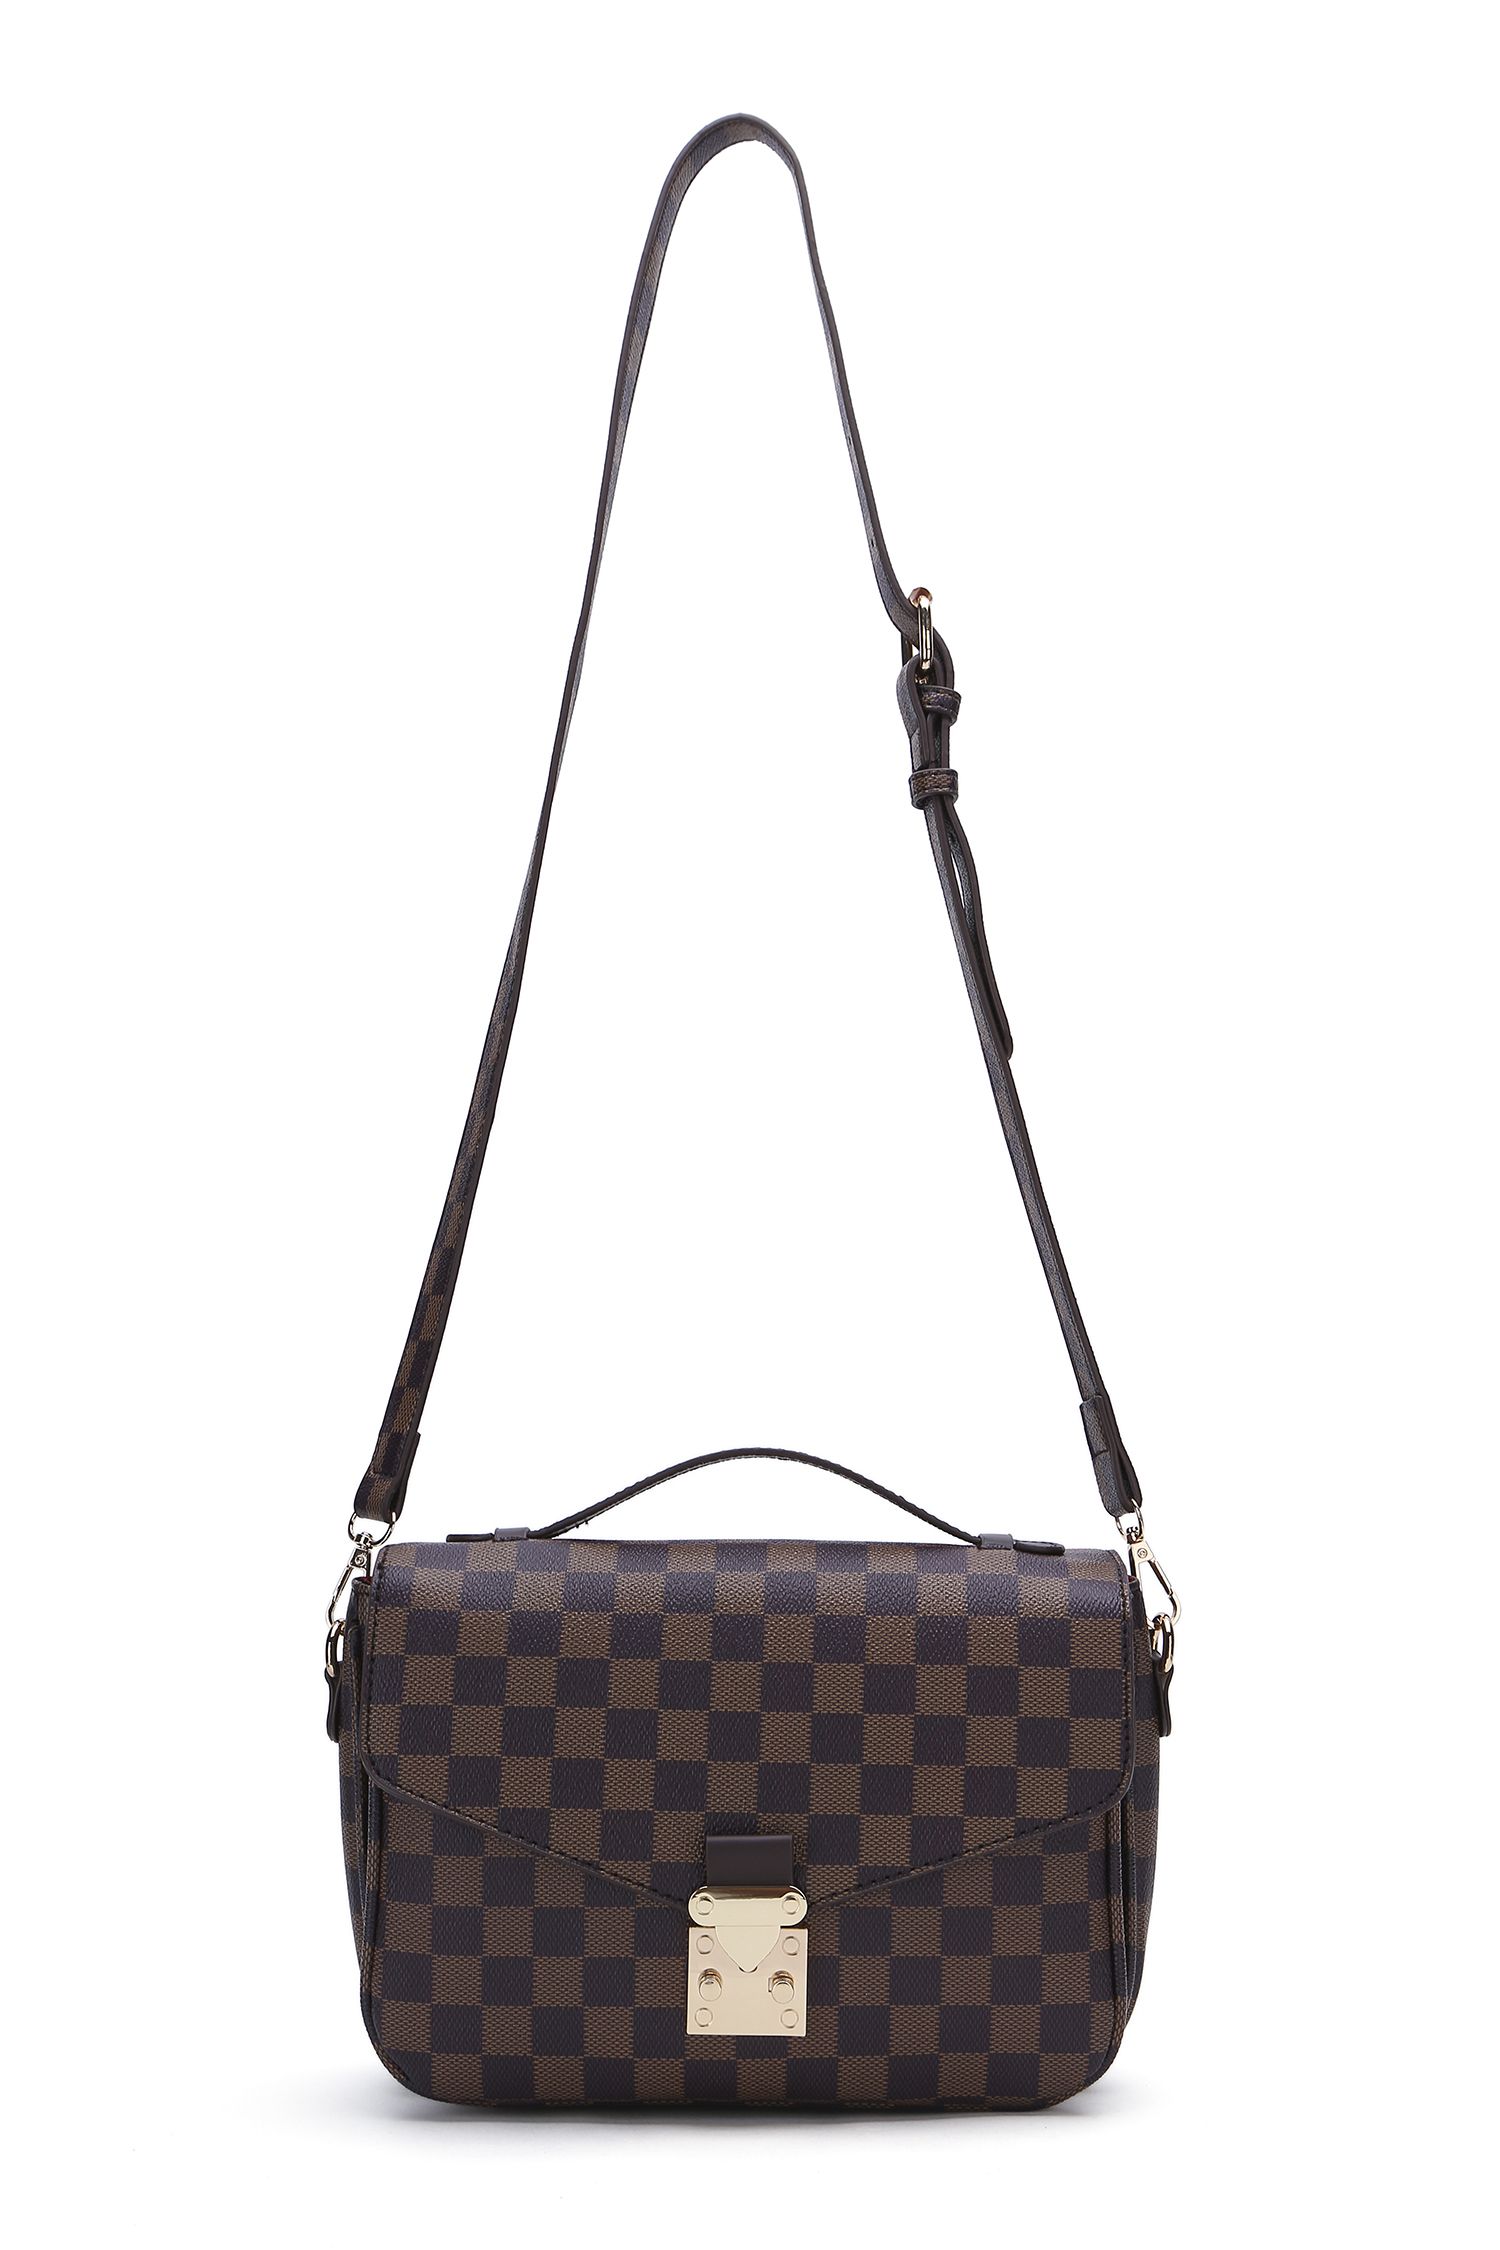 Richports Checkered Tote Shoulder Handbags Bag with Inner Pouch Pu Vegan Leather | Walmart (US)